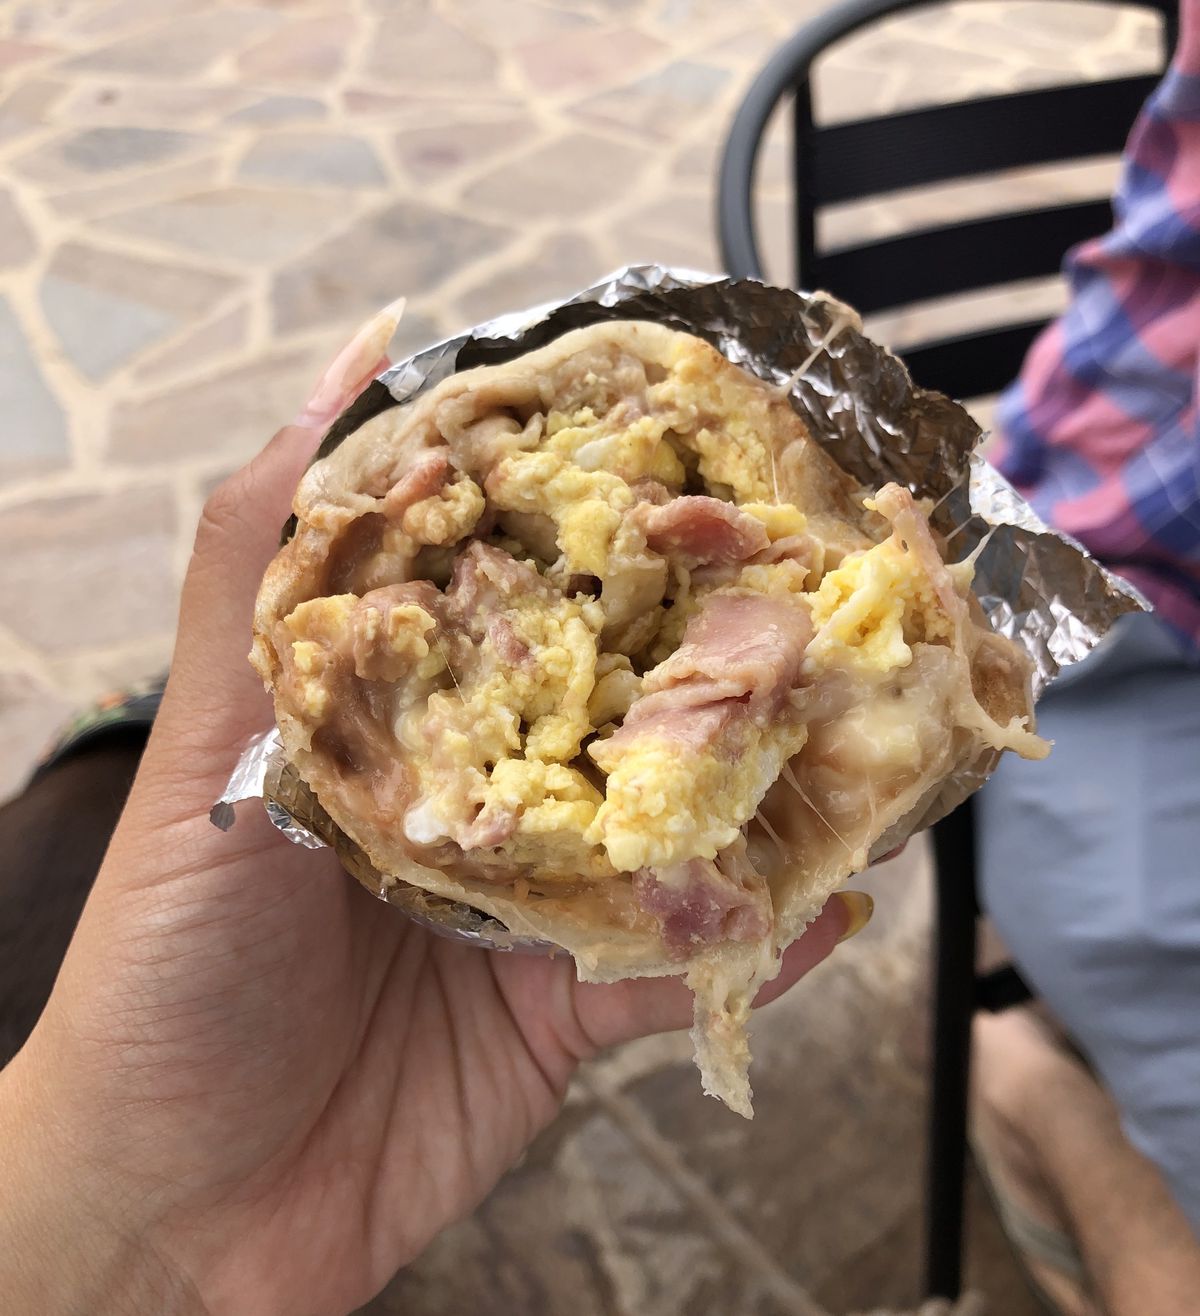 A hand holding a photo of half a breakfast burrito encased in tinfoil with slices of ham, refried beans, scrambled egg, and melted cheese.